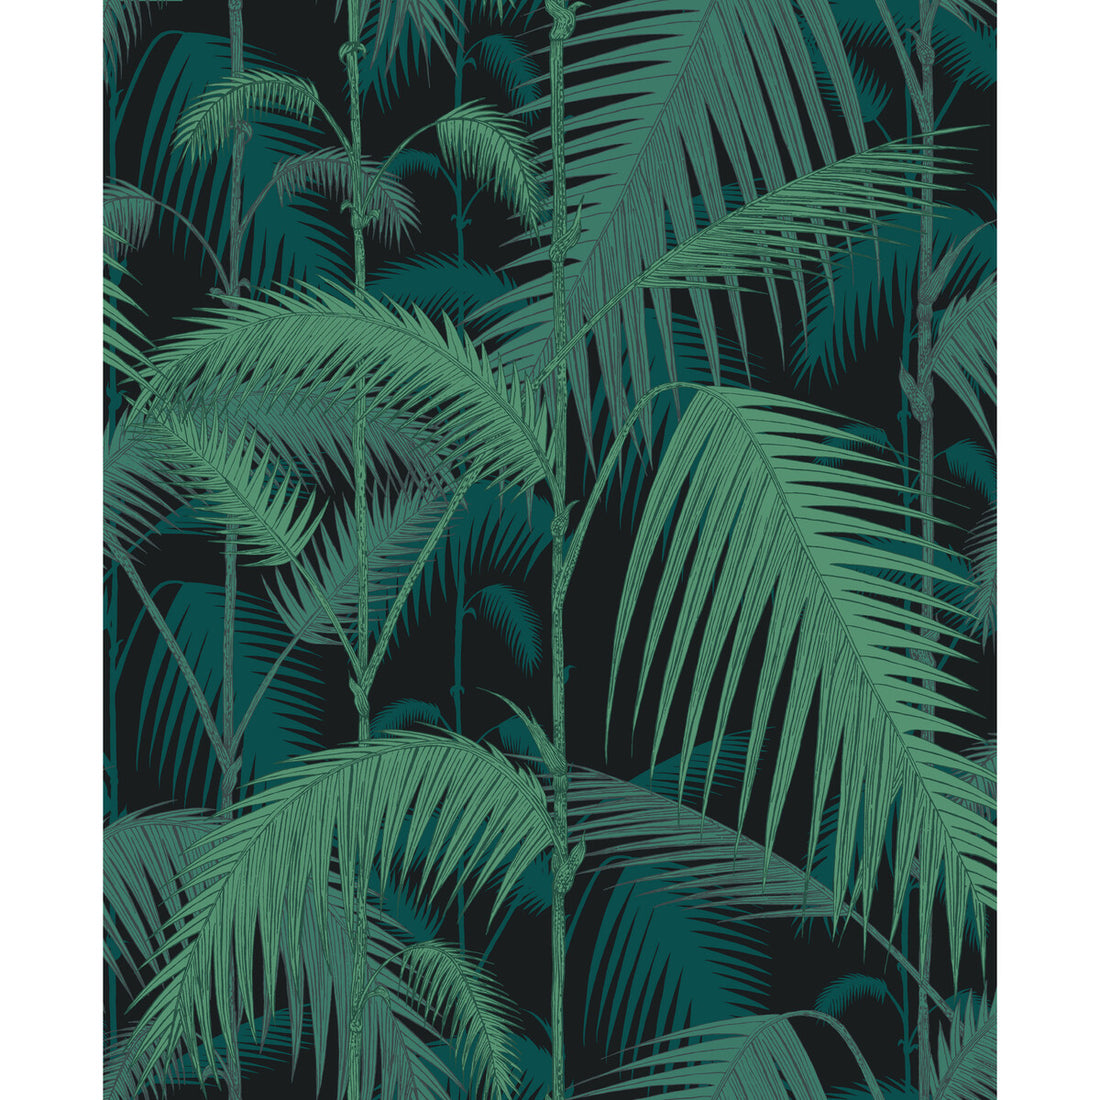 Palm Jungle fabric in viri/pet on blk color - pattern F111/2004V.CS.0 - by Cole &amp; Son in the Cole &amp; Son Contemporary Fabrics collection